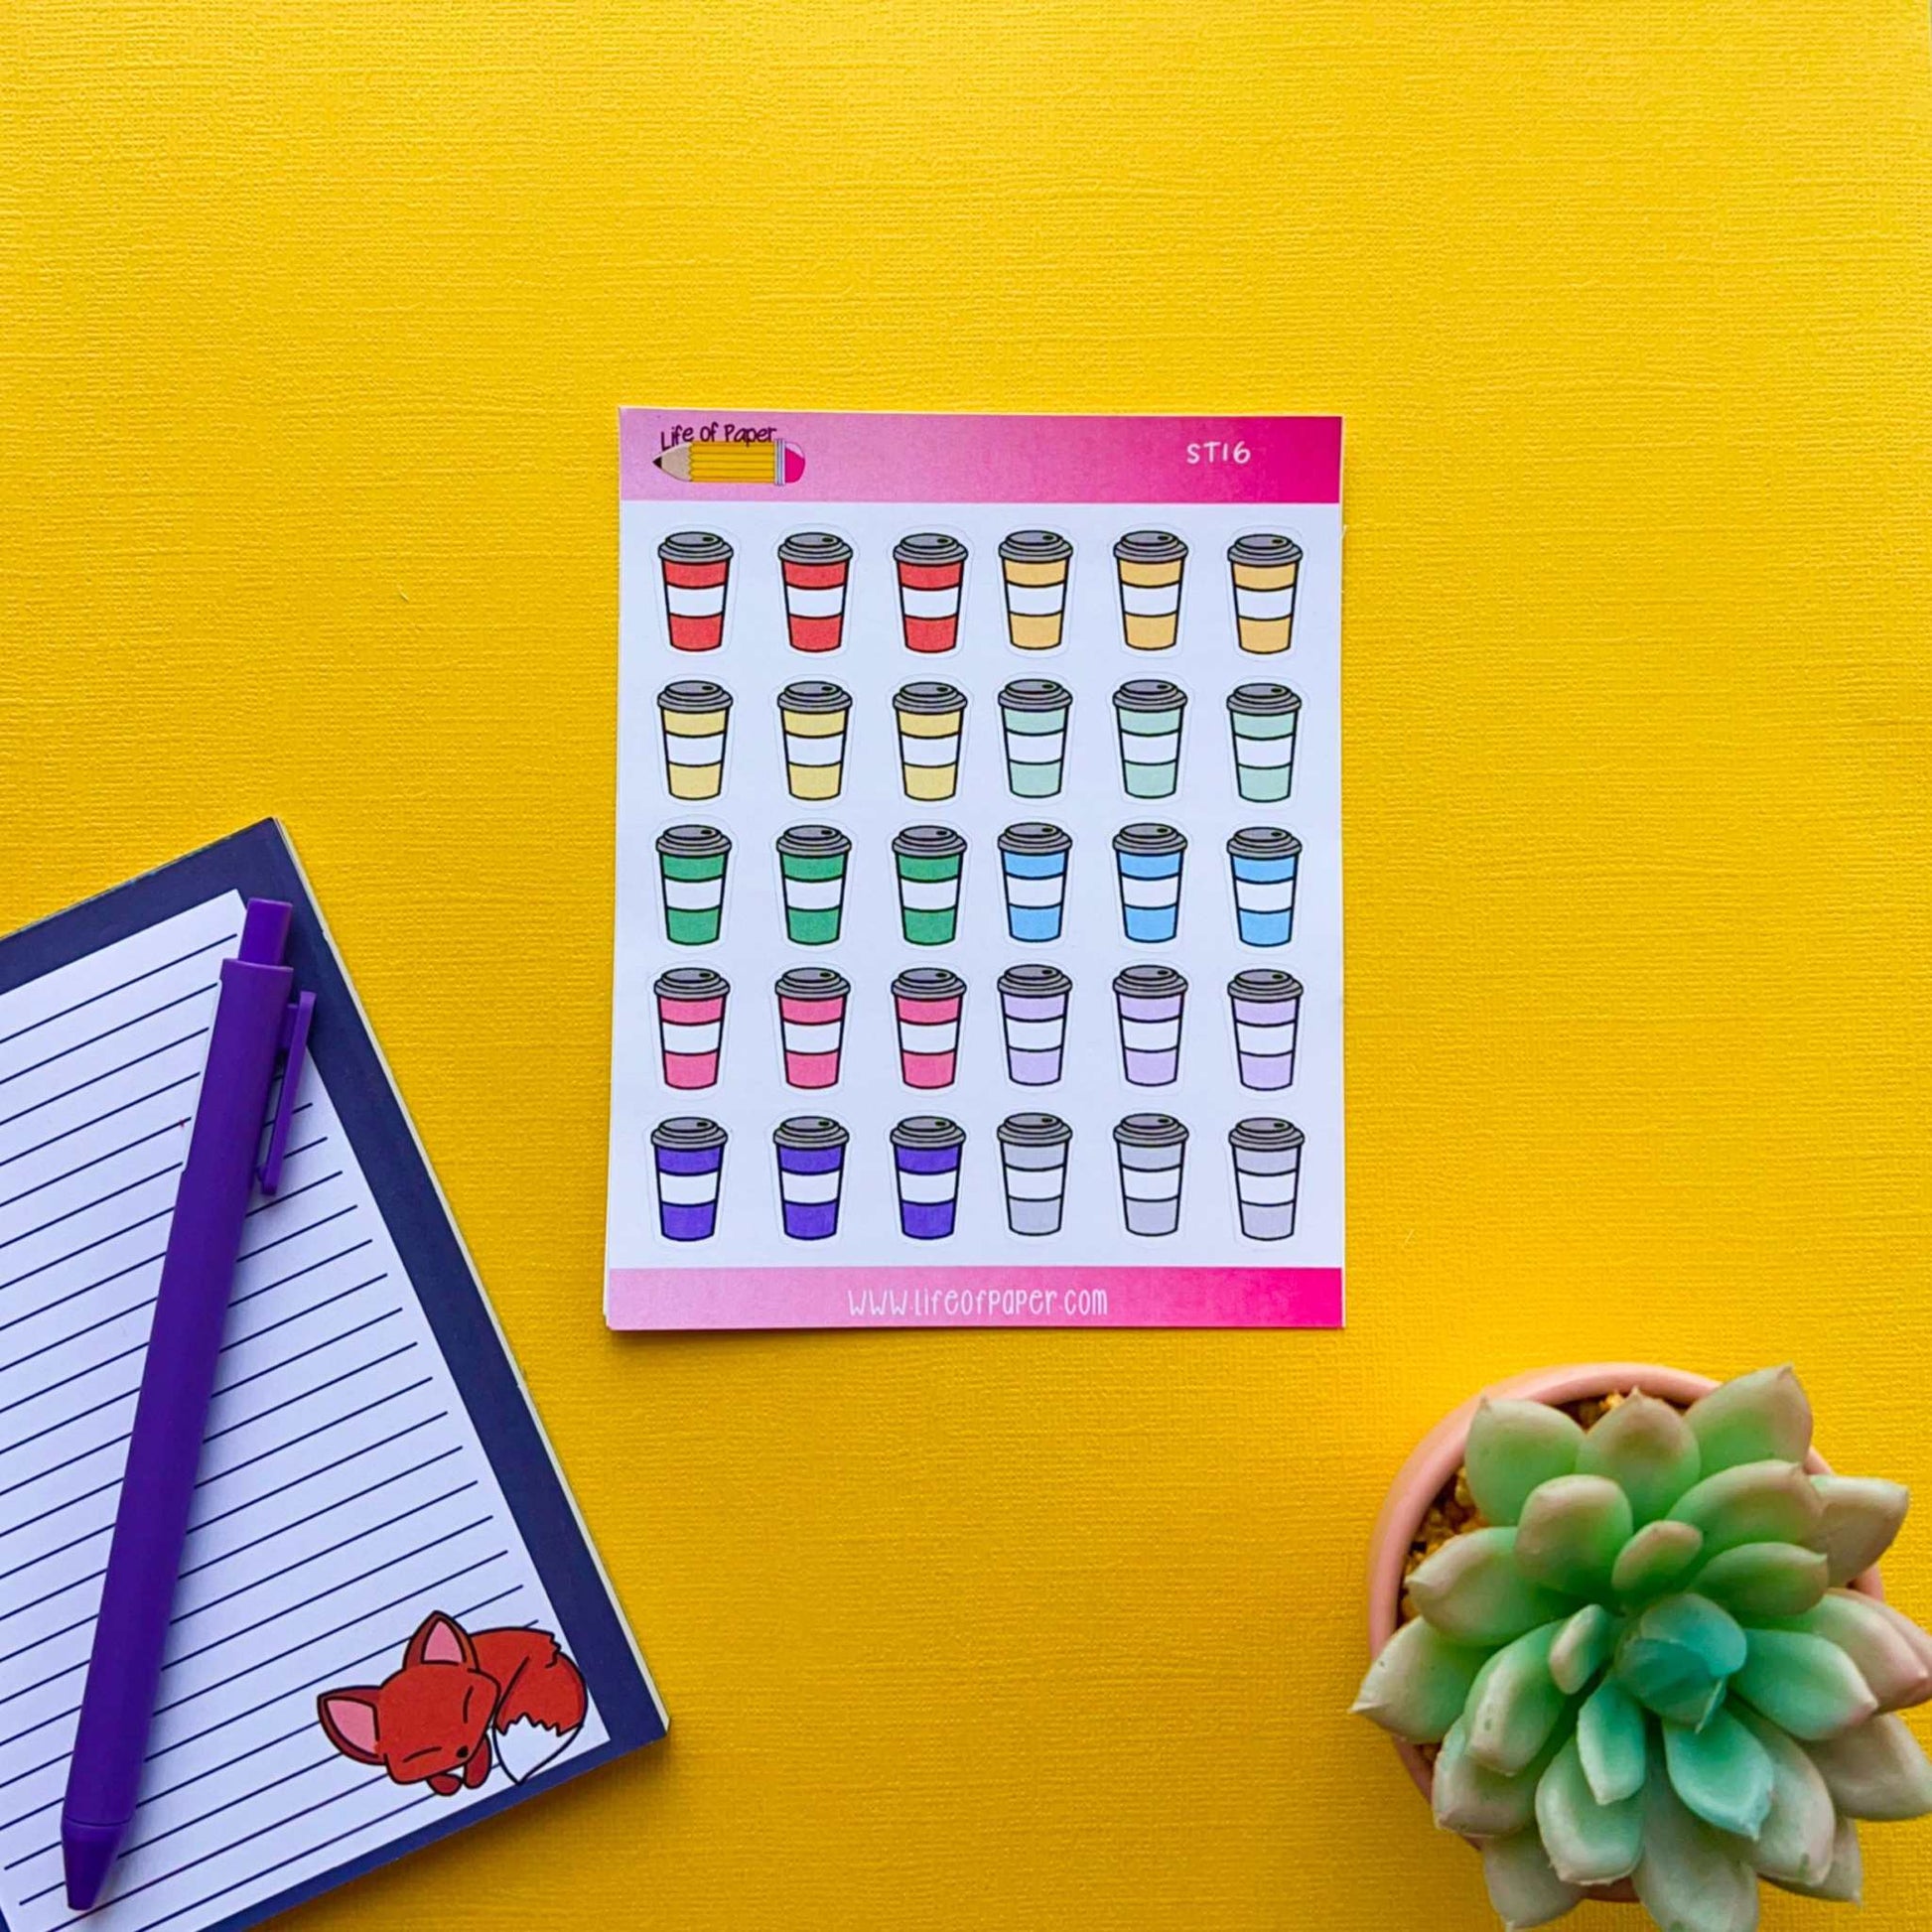 A sheet of Rainbow Coffee Cup Planner Stickers on a yellow background. To the left, a notepad with a fox at the bottom and a purple pen are placed. A small green succulent in a pot is on the right.